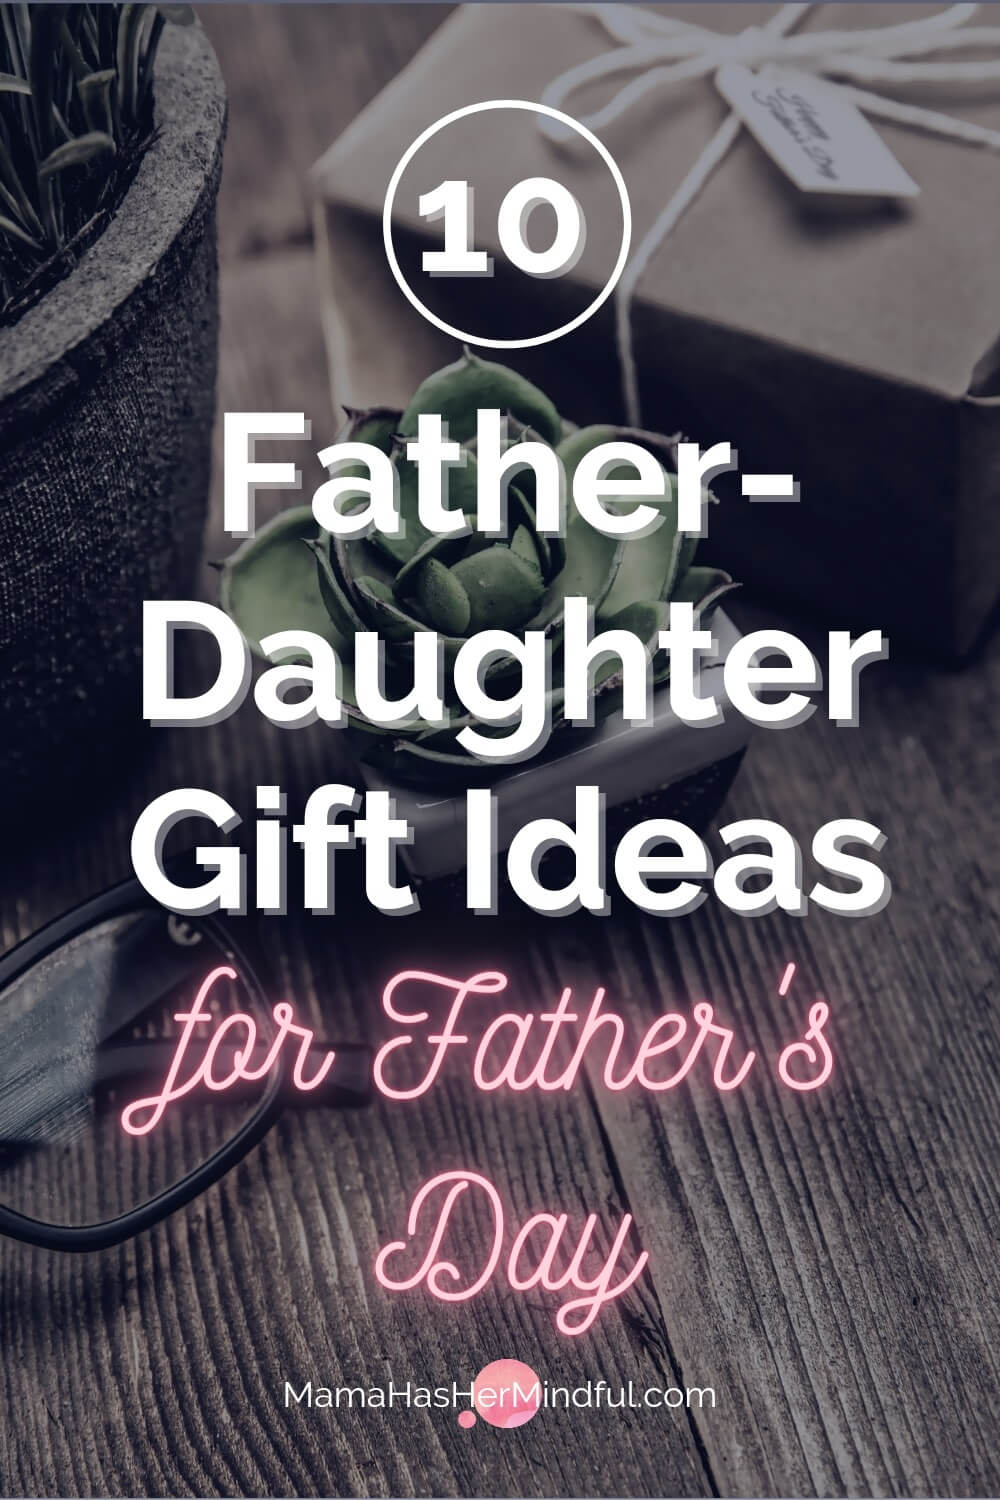 40 Best Father's Day Gifts From Daughters 2021 - What to Get Dads